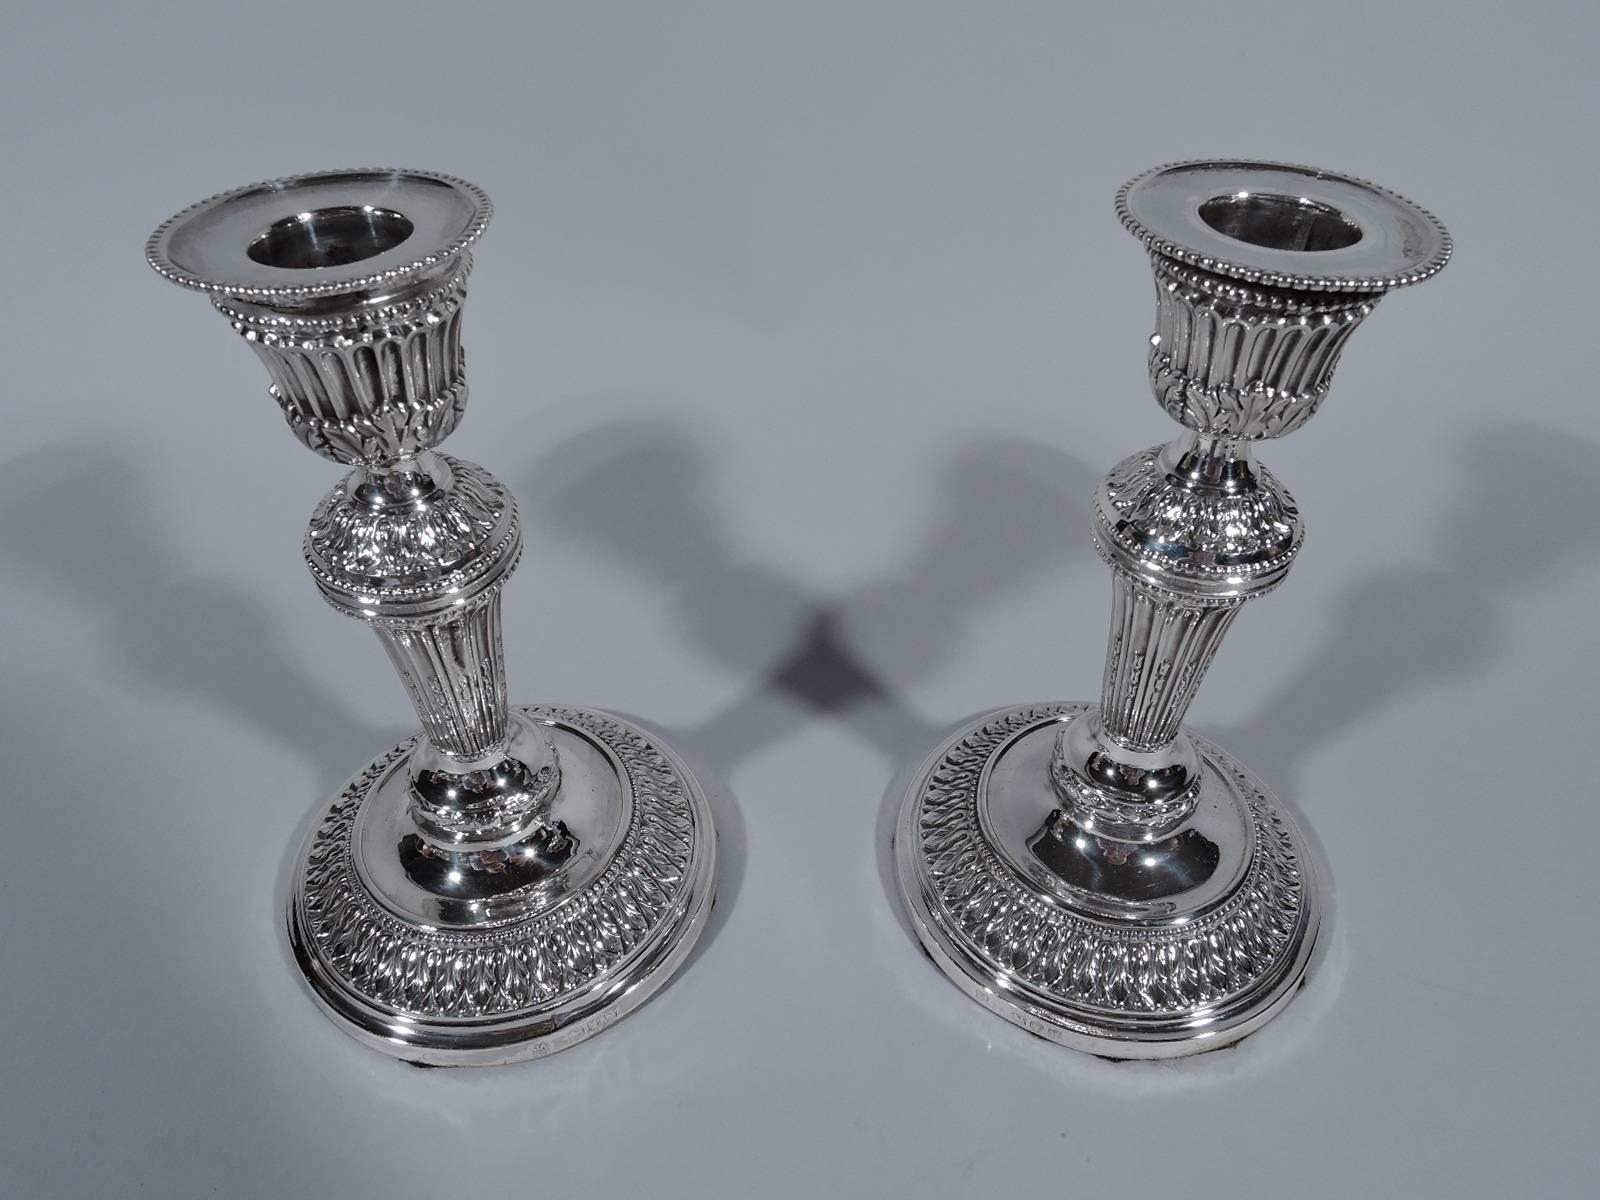 Pair of Victorian sterling silver candlesticks. Made by John Aldwinckle & Thomas Slater in London, 1892-1893. Each: Tapering column on raised foot. Detachable bobeche. Neoclassical ornament including beading, leaf-and-dart, and acanthus leaves. A